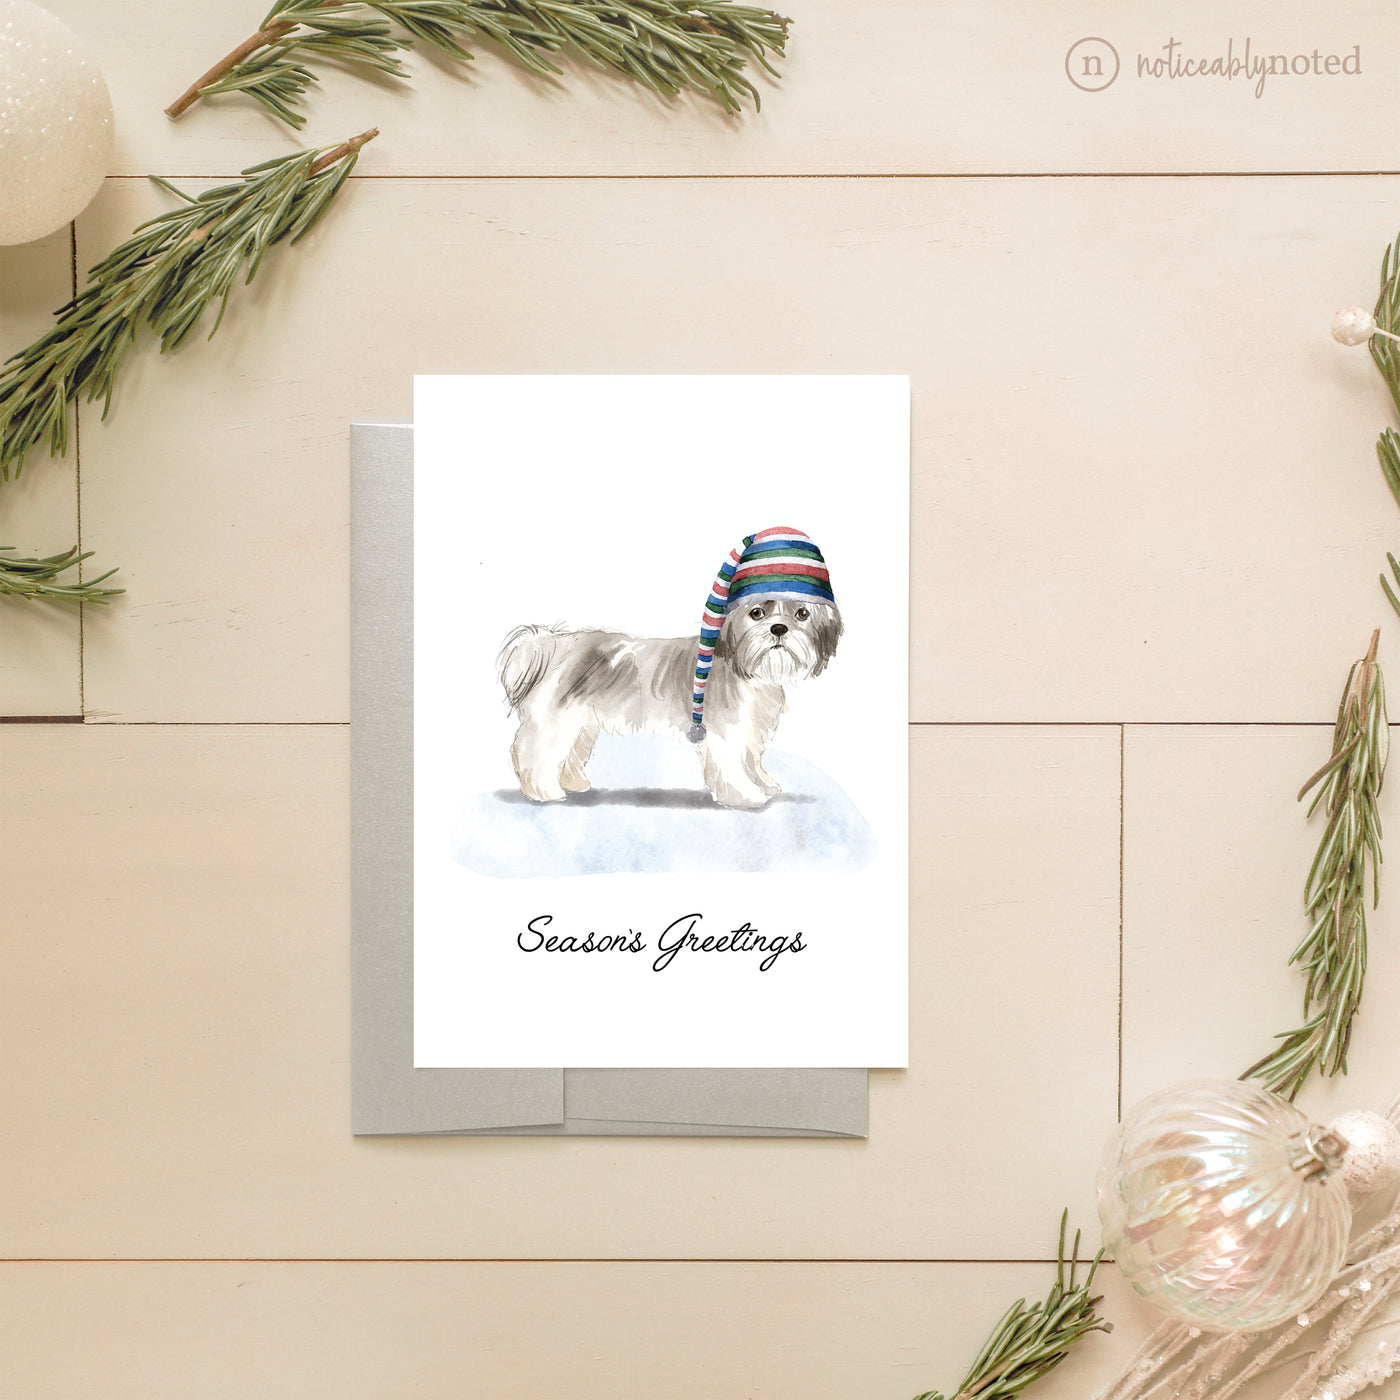 Shih Tzu Christmas Card | Noticeably Noted